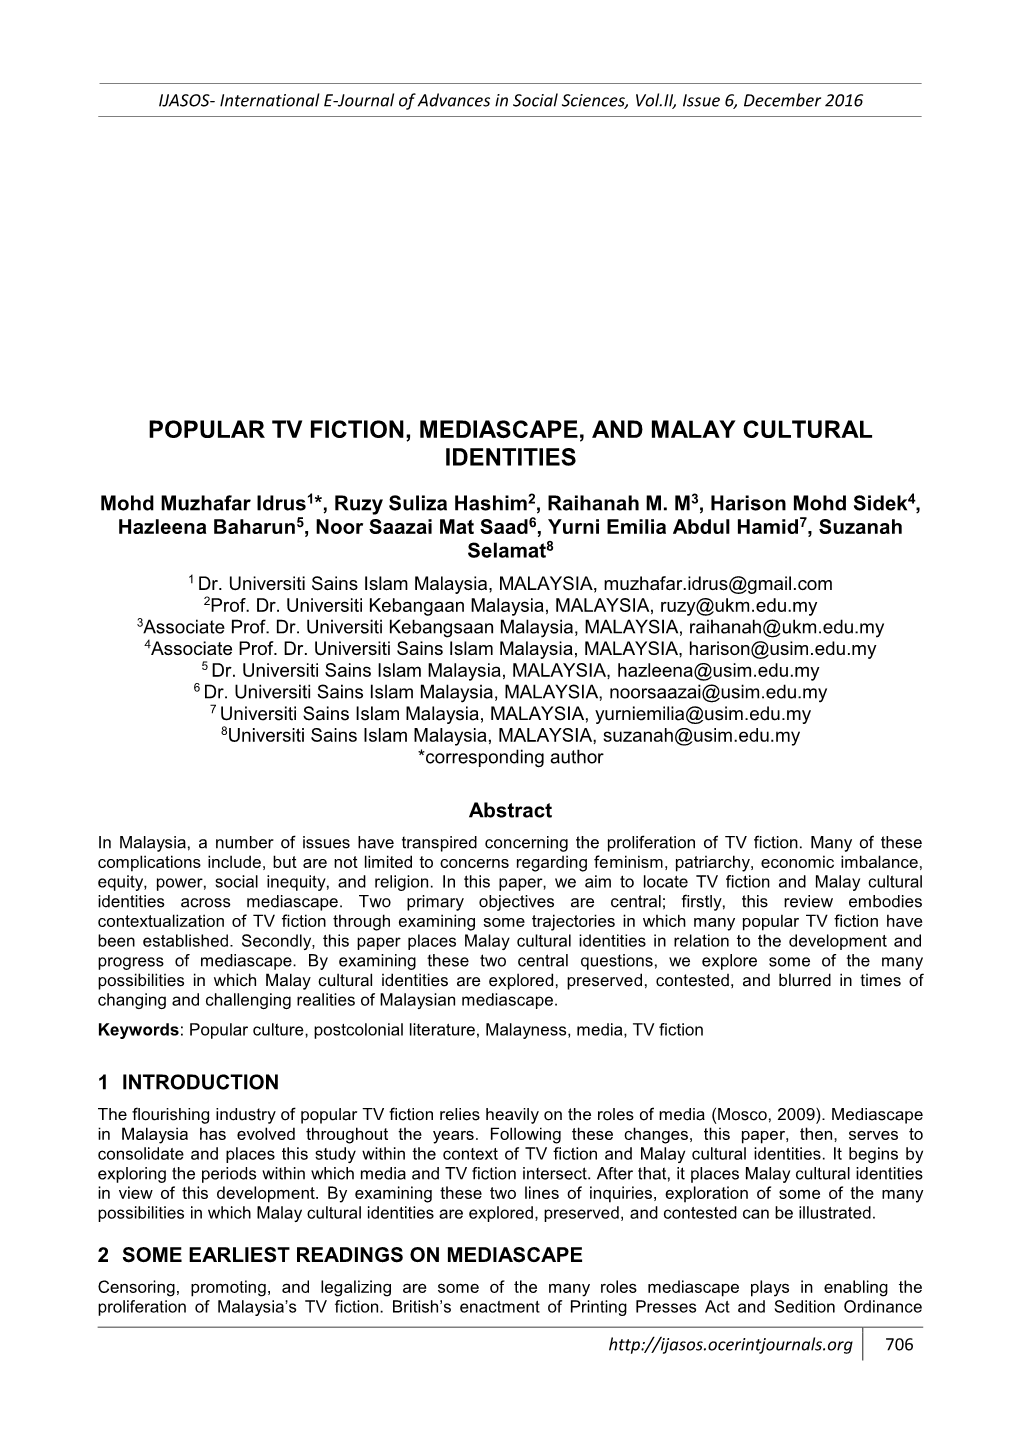 Popular Tv Fiction, Mediascape, and Malay Cultural Identities